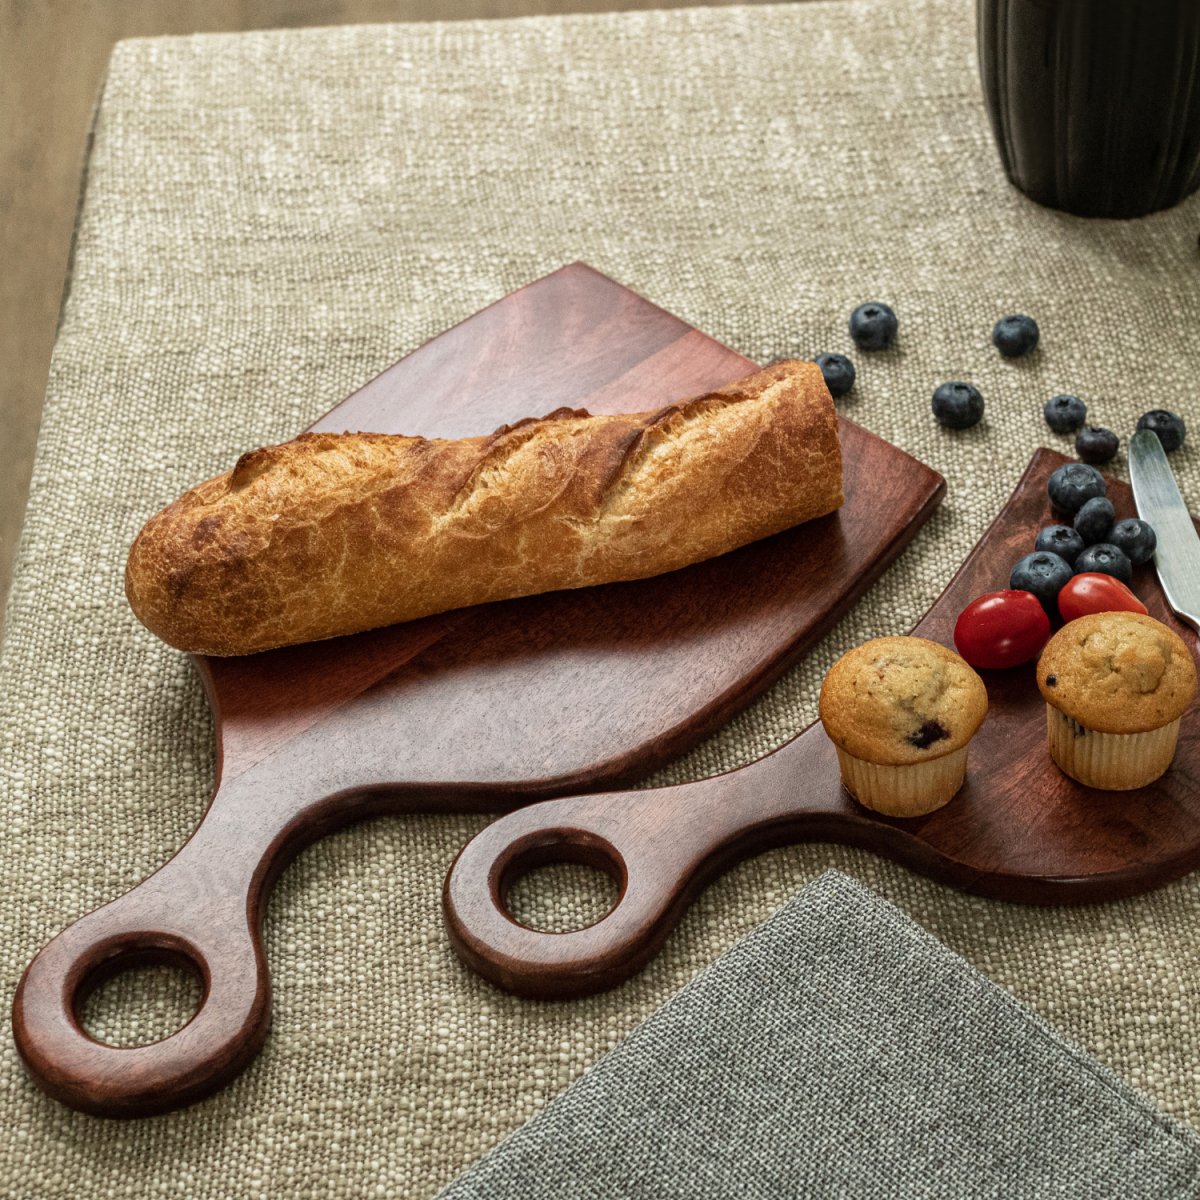 Romantic Wooden Charcuterie Boards, Set of 2 with bread, cupcakes, berries lifestyle image - Aesthetic Living